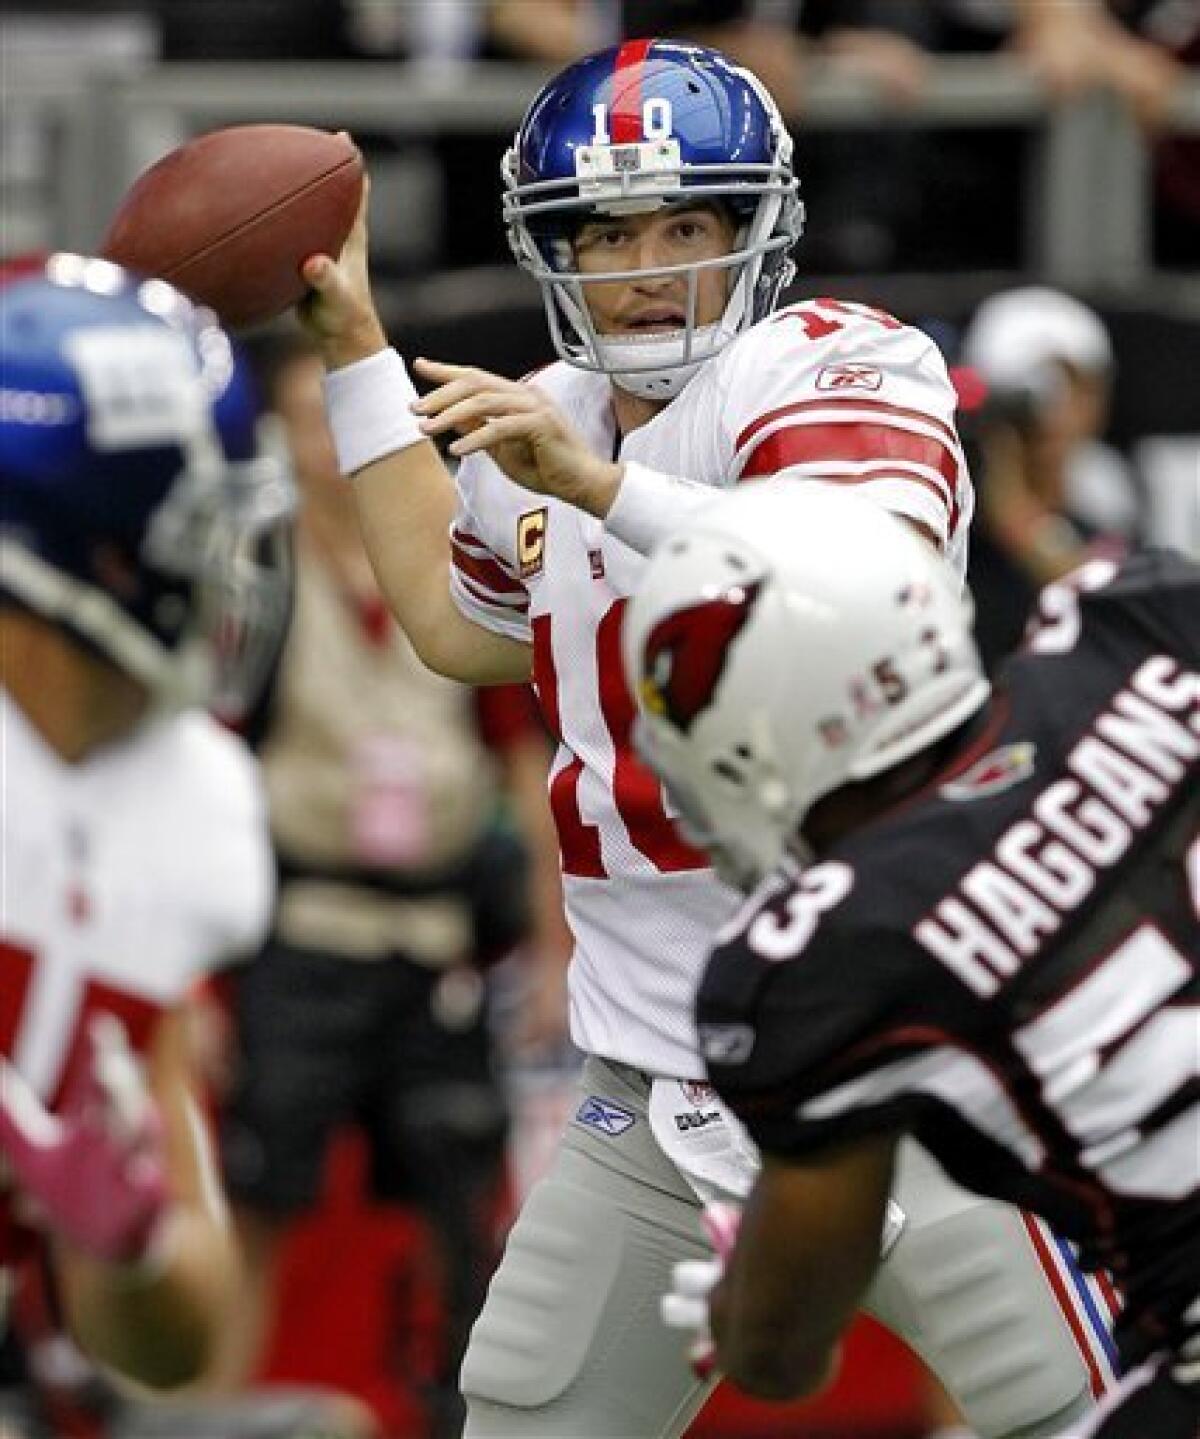 Manning leads Giants to Super Bowl victory